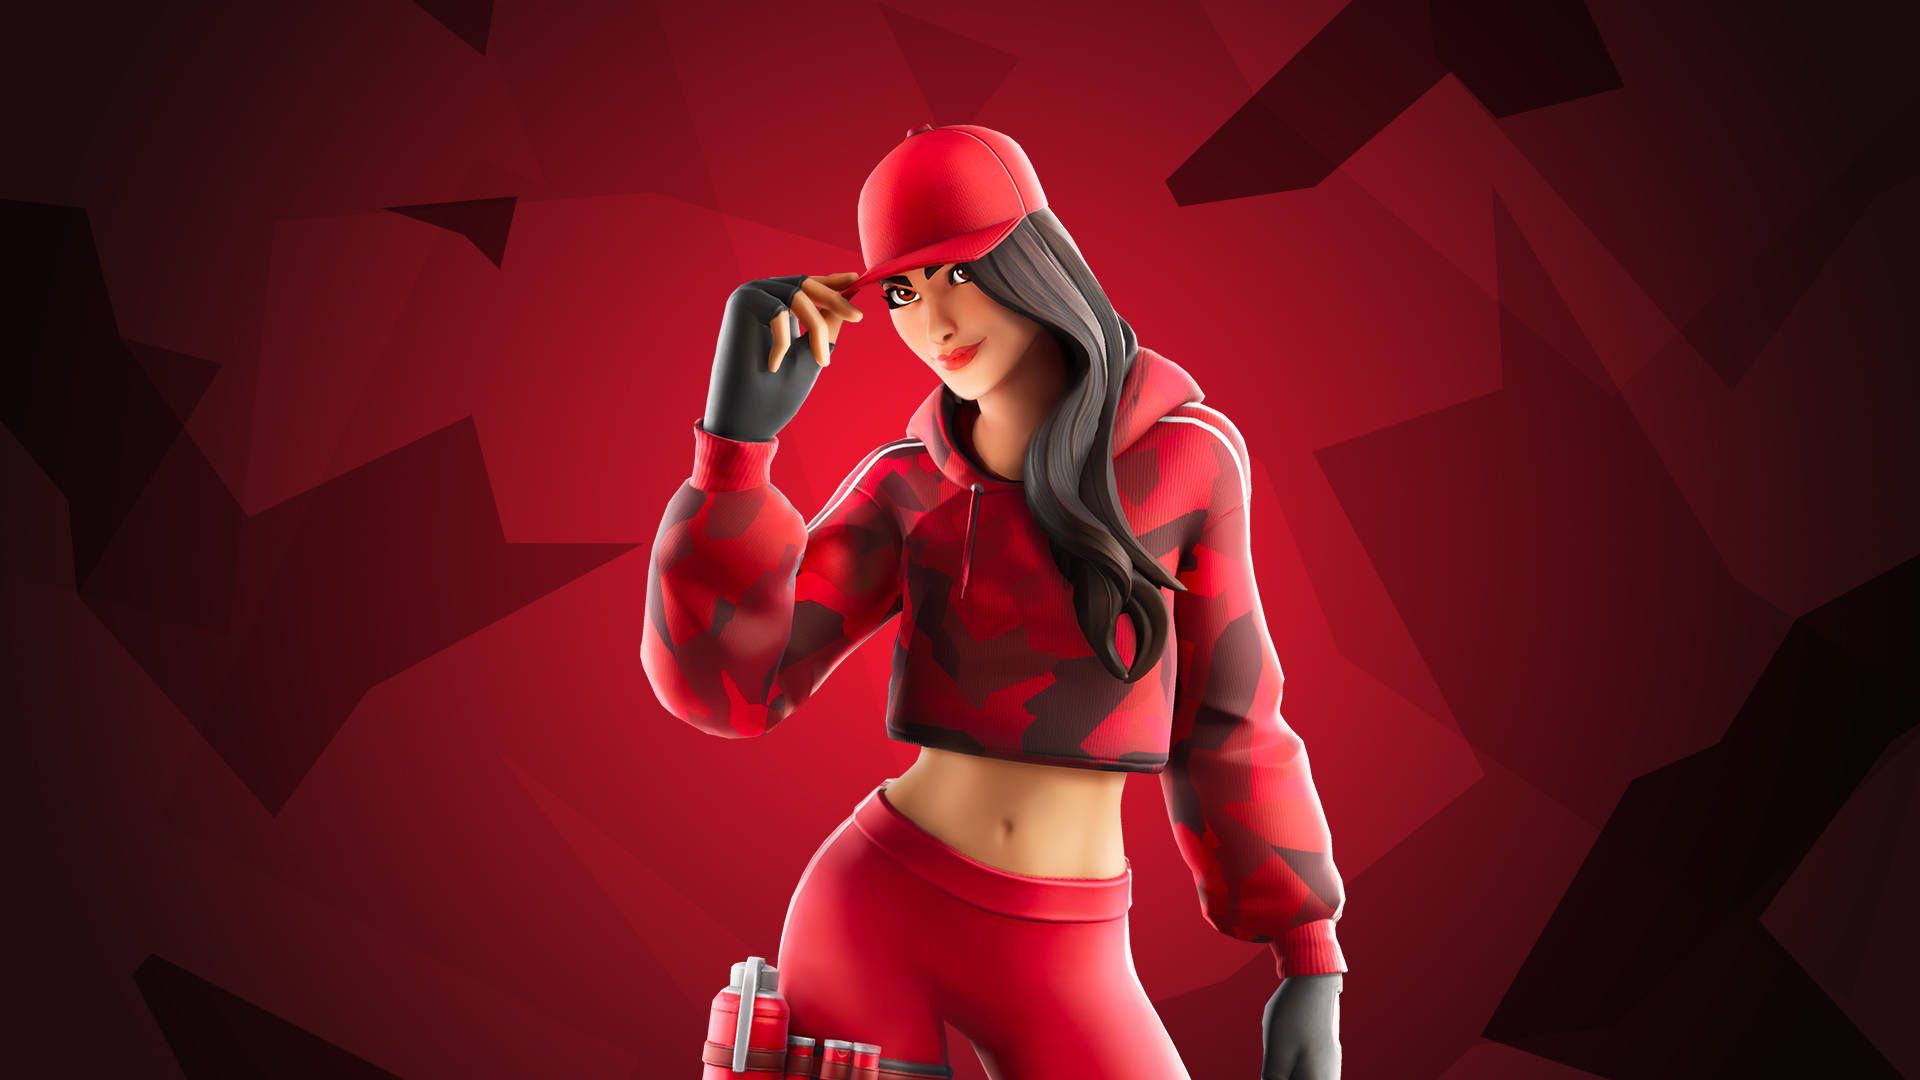 A female character in a red sports outfit, holding a baseball bat. - Fortnite